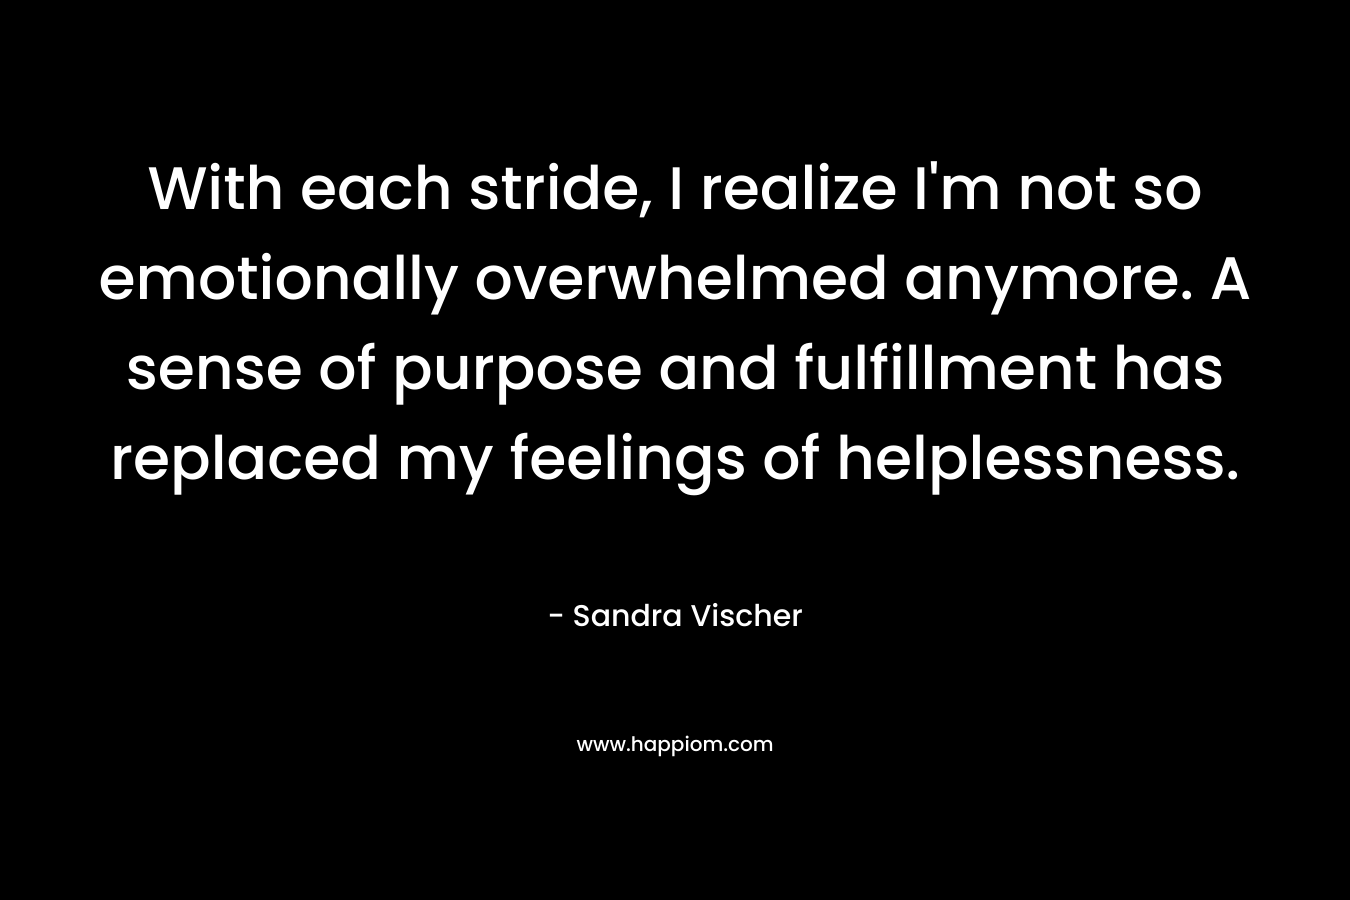 With each stride, I realize I’m not so emotionally overwhelmed anymore. A sense of purpose and fulfillment has replaced my feelings of helplessness. – Sandra Vischer